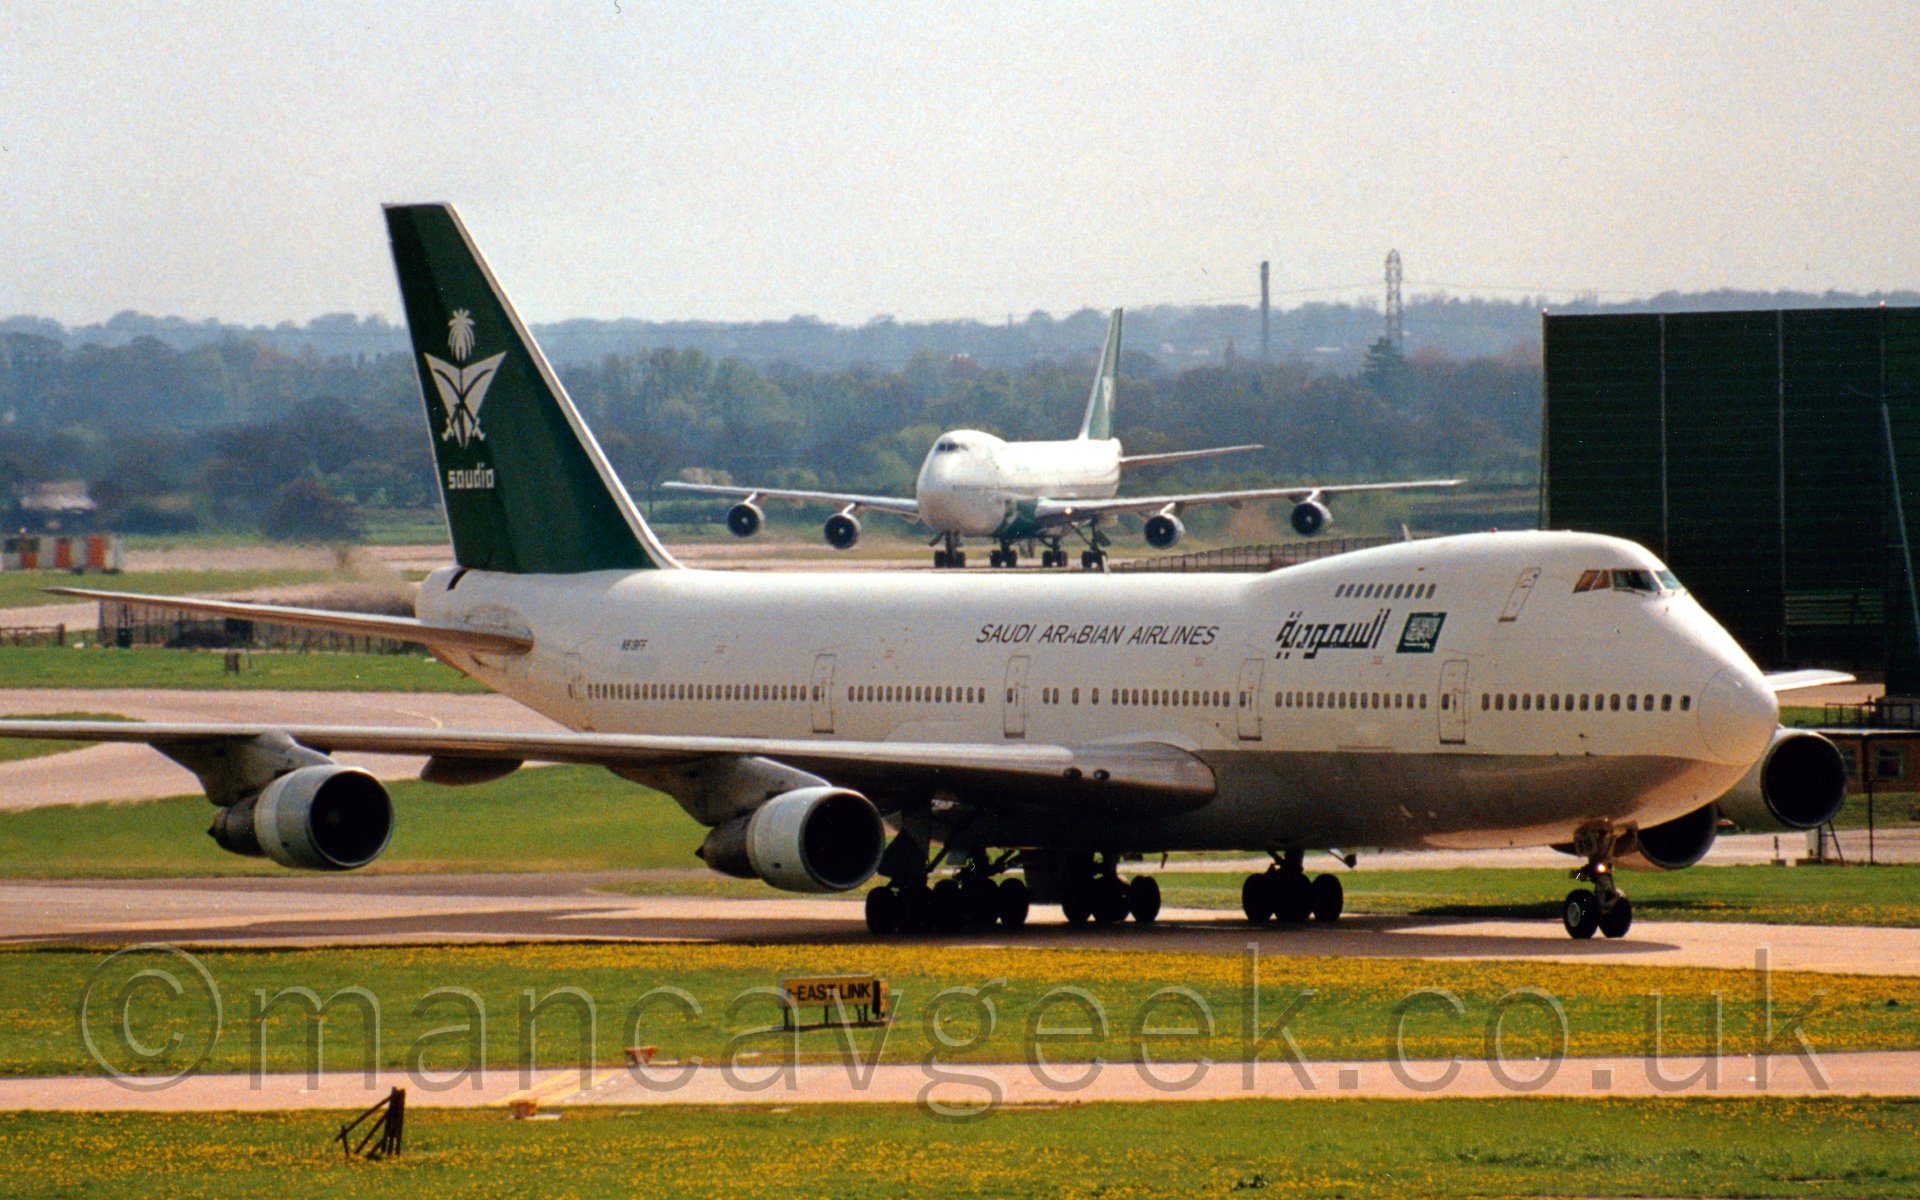 Side view of a very large 4 engined jet airliner taxiing from left to right. The plane is mostly white, with a silver belly, There are black "Saudi Arabian Airlines" titles in English on the upper forward fuselage, starting over the wings, with similar titles further forward in an Arabic script. The tail is a dark green, with crossed curved sword over a palm tree and and inverted chevron logo, with "Saudi" titles underneath. Behind is a similar plane, with trees in the far background, under a misty grey sky.